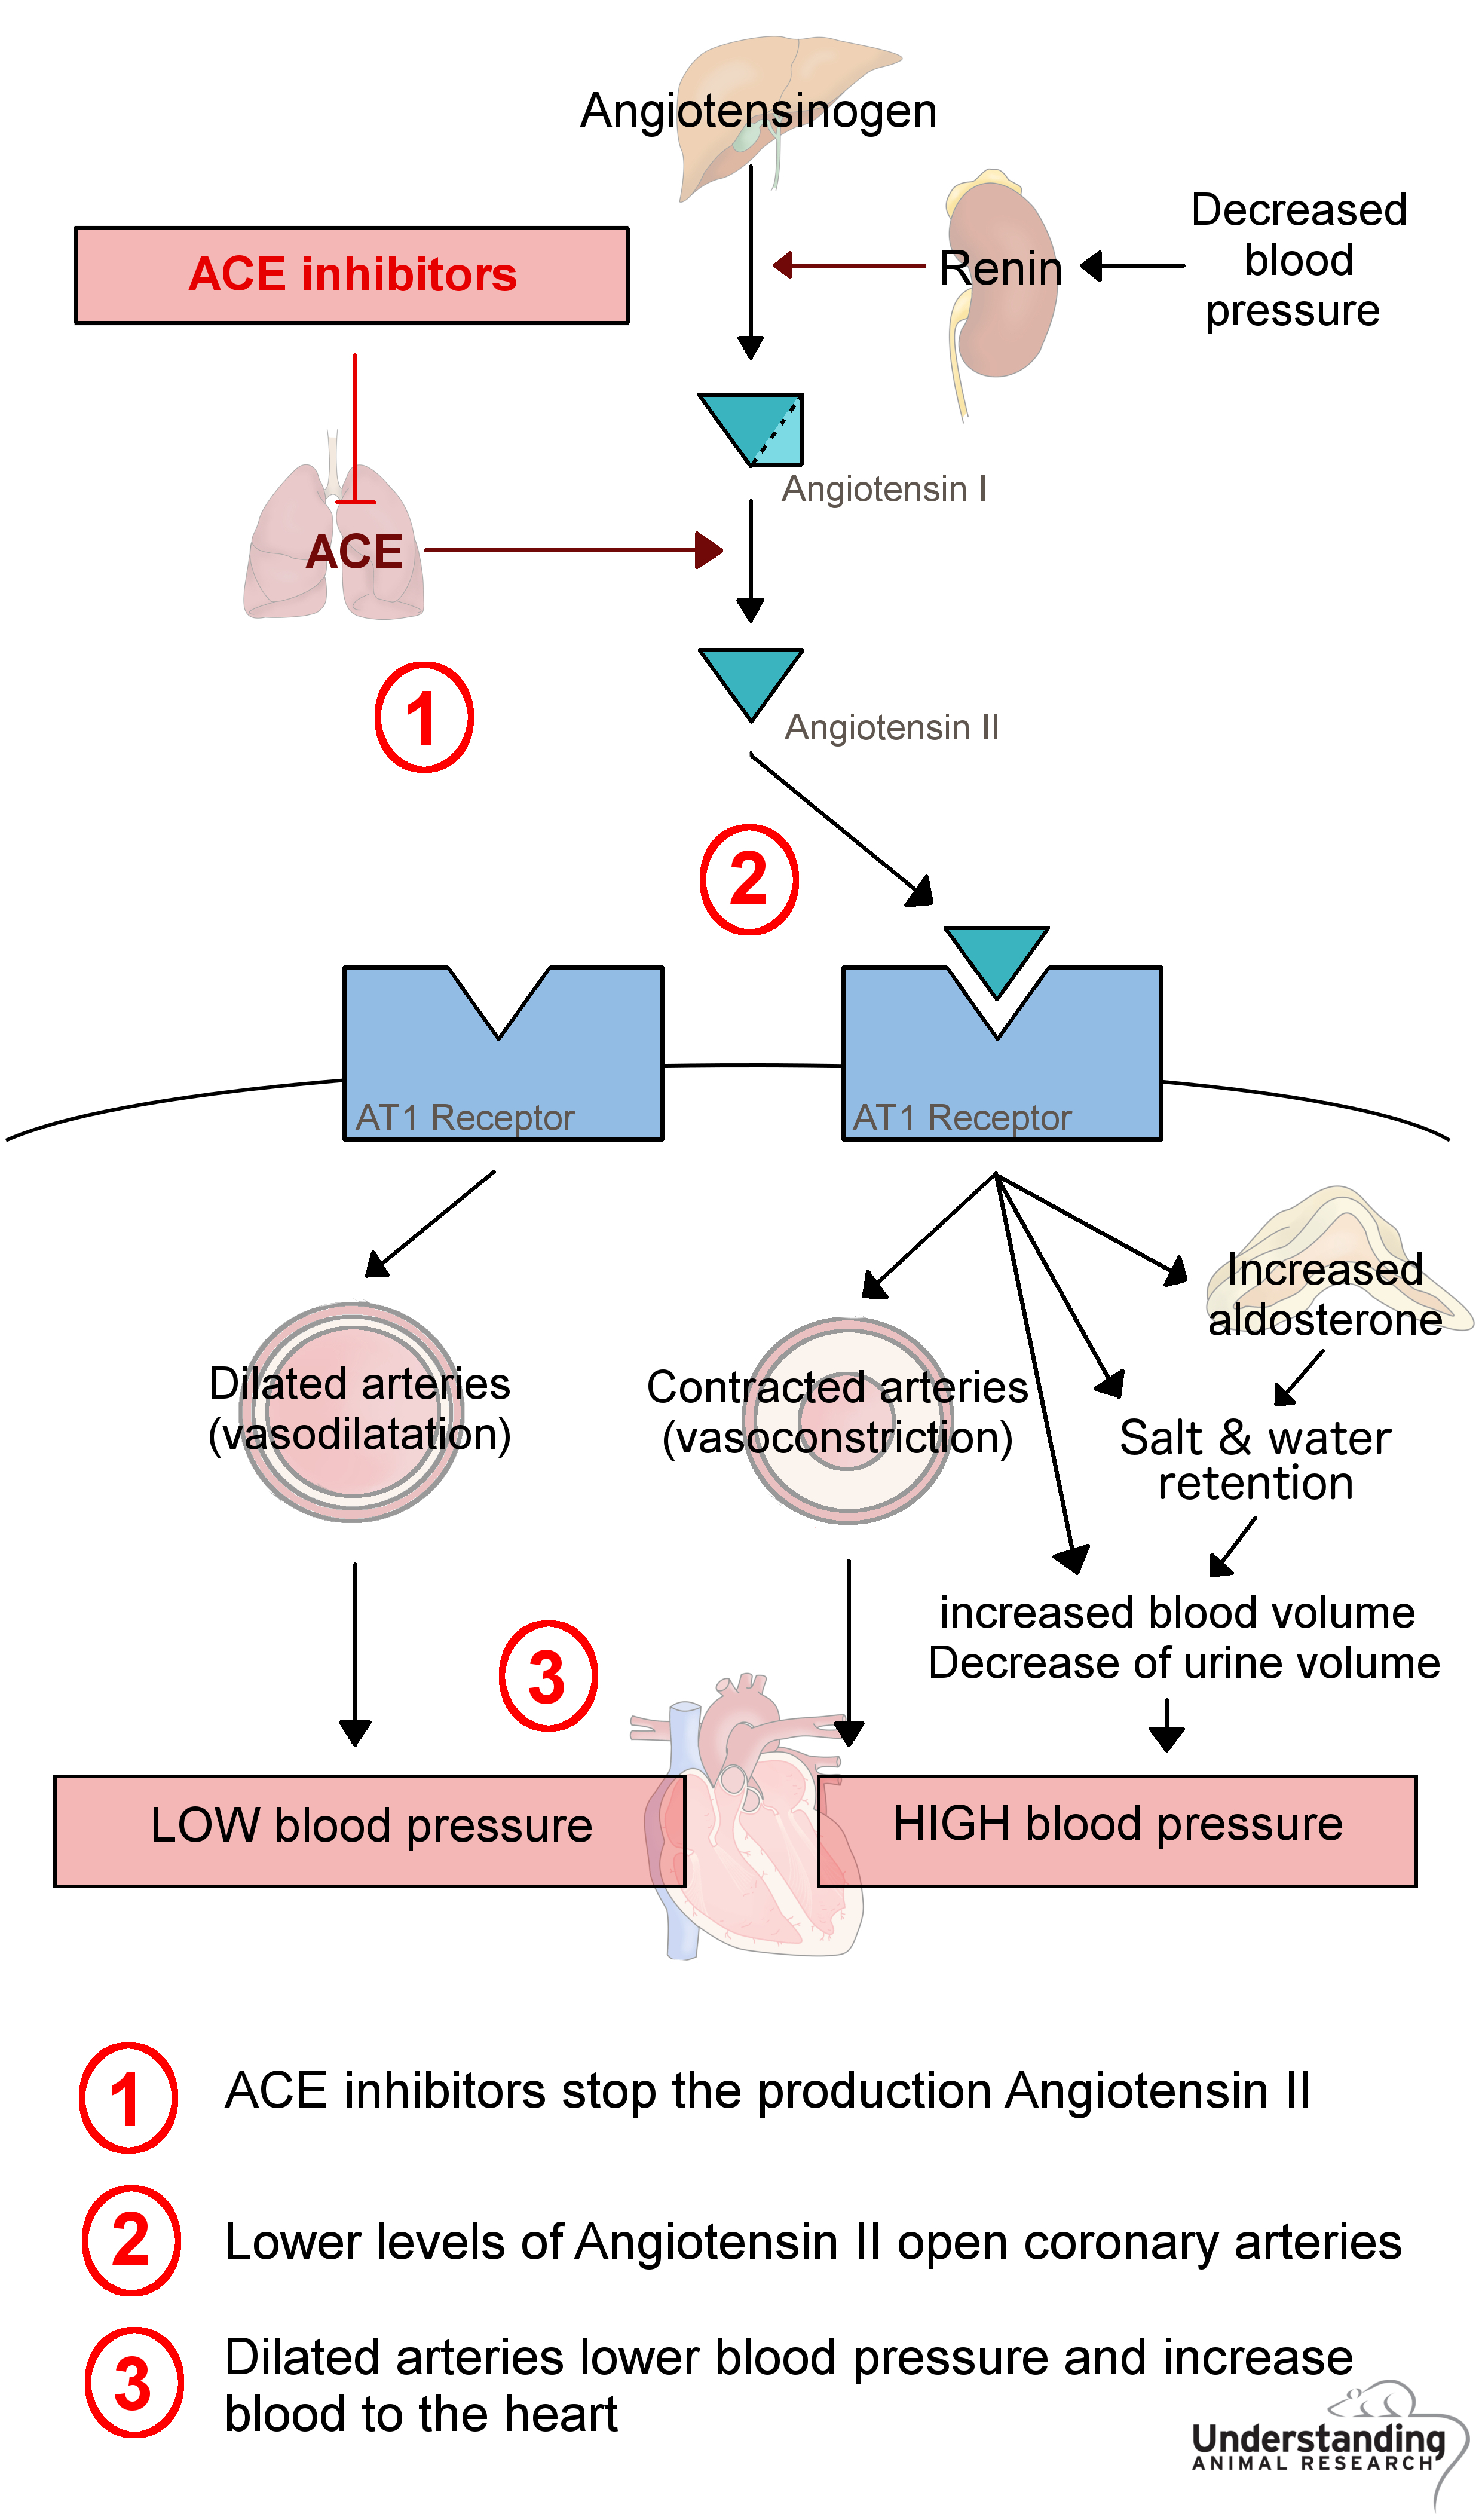 ace inhibitors for blood pressure